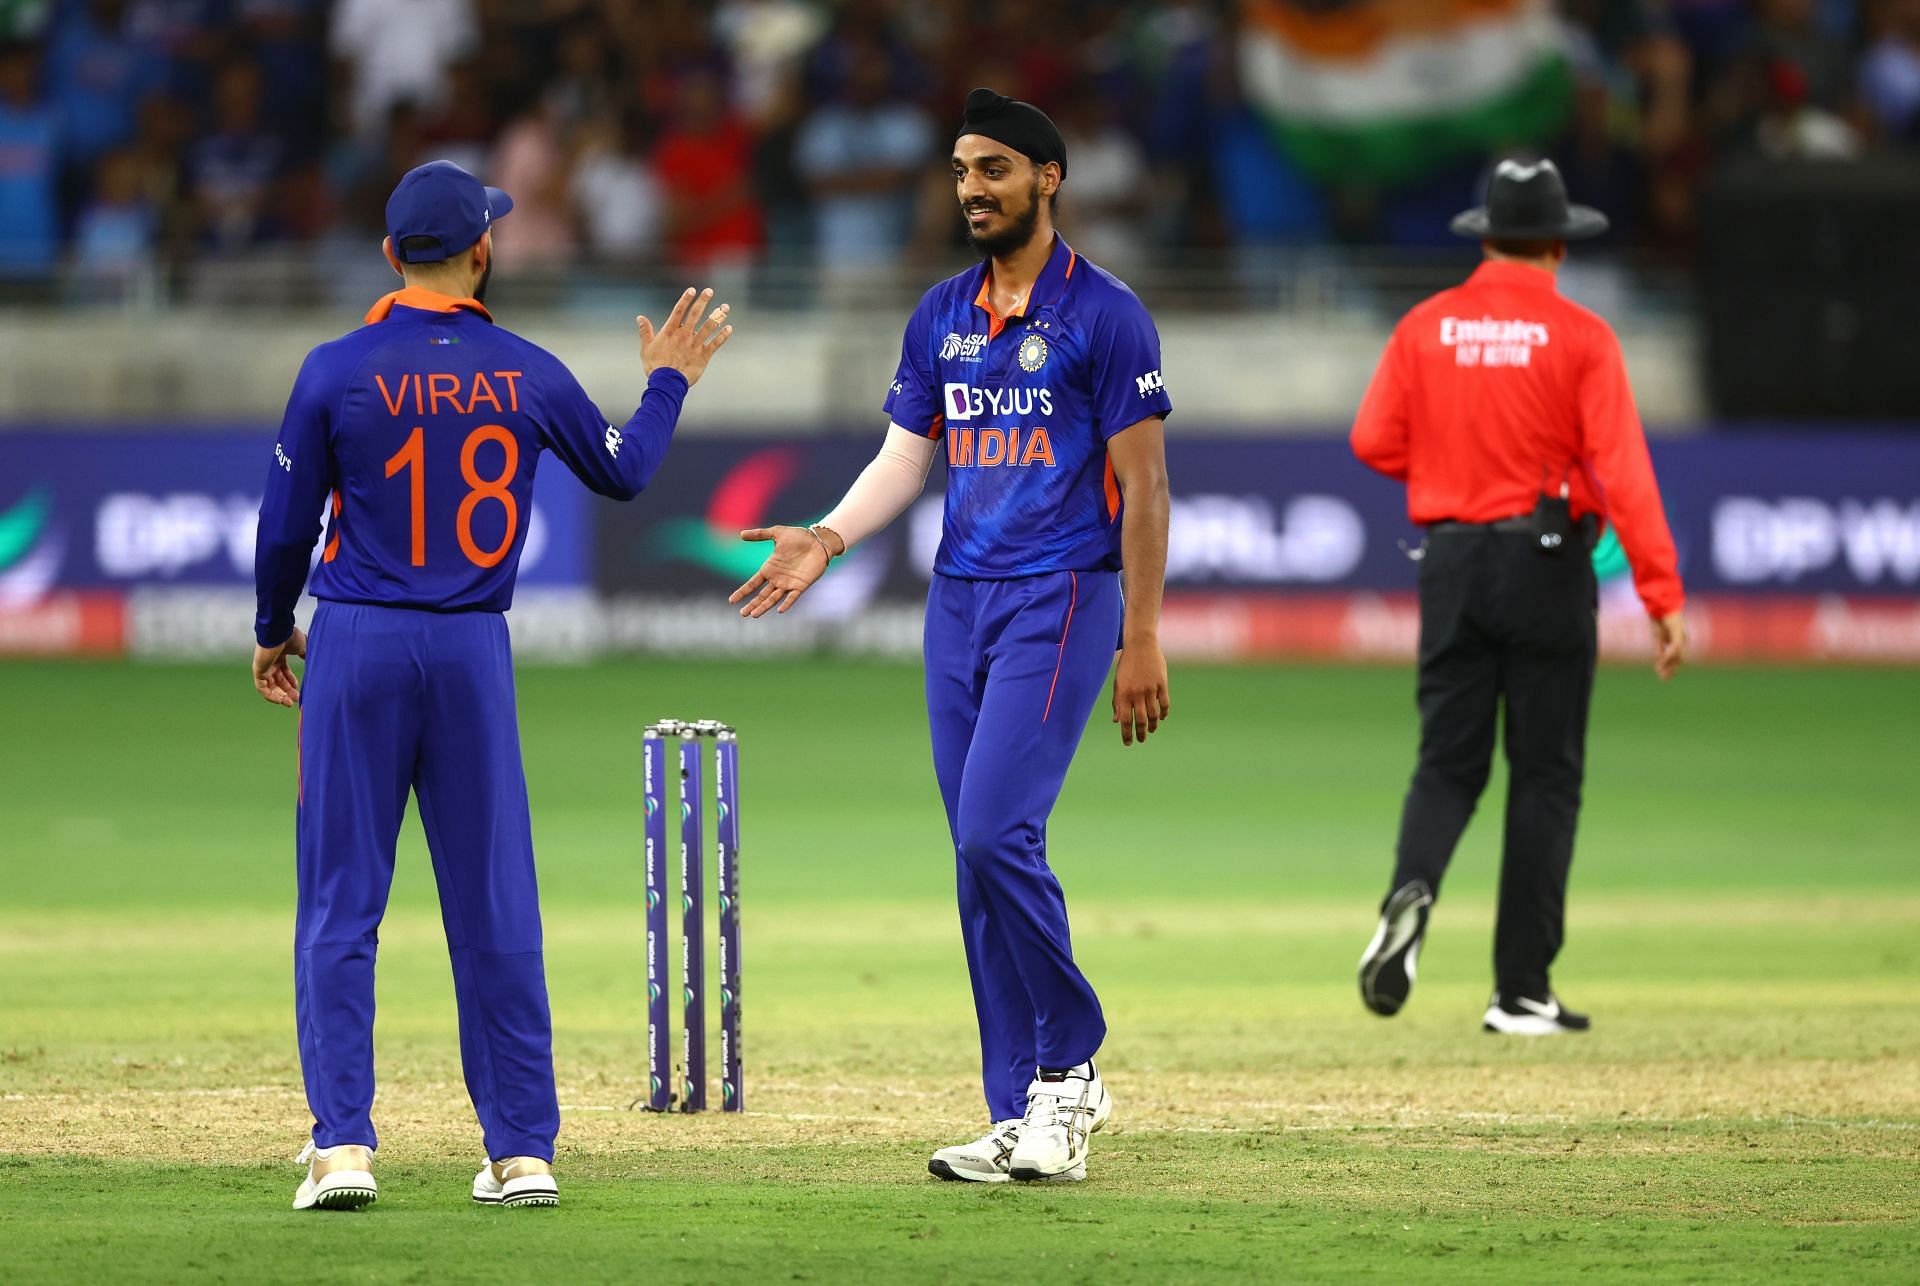 IND vs SA 2022: "I prefer Arshdeep Singh in the playing XI because death bowling has been a worry as of late" - Wasim Jaffer vouches for the selection of the left-arm pacer ahead of Deepak Chahar